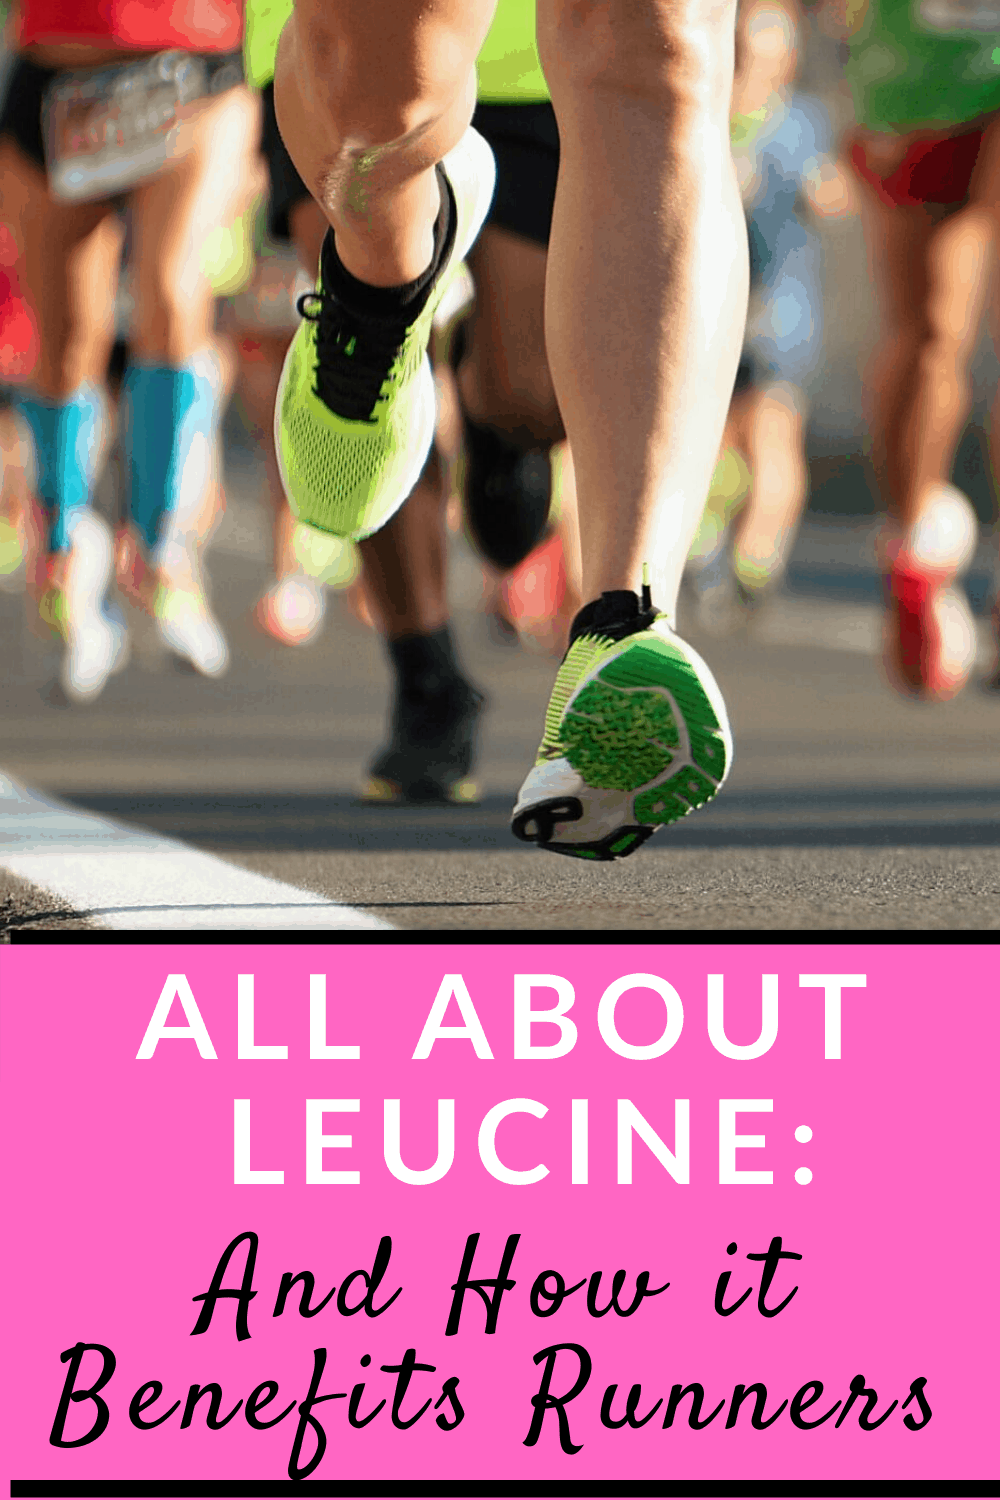 Marathon runners with text overlay about how leucine benefits runners